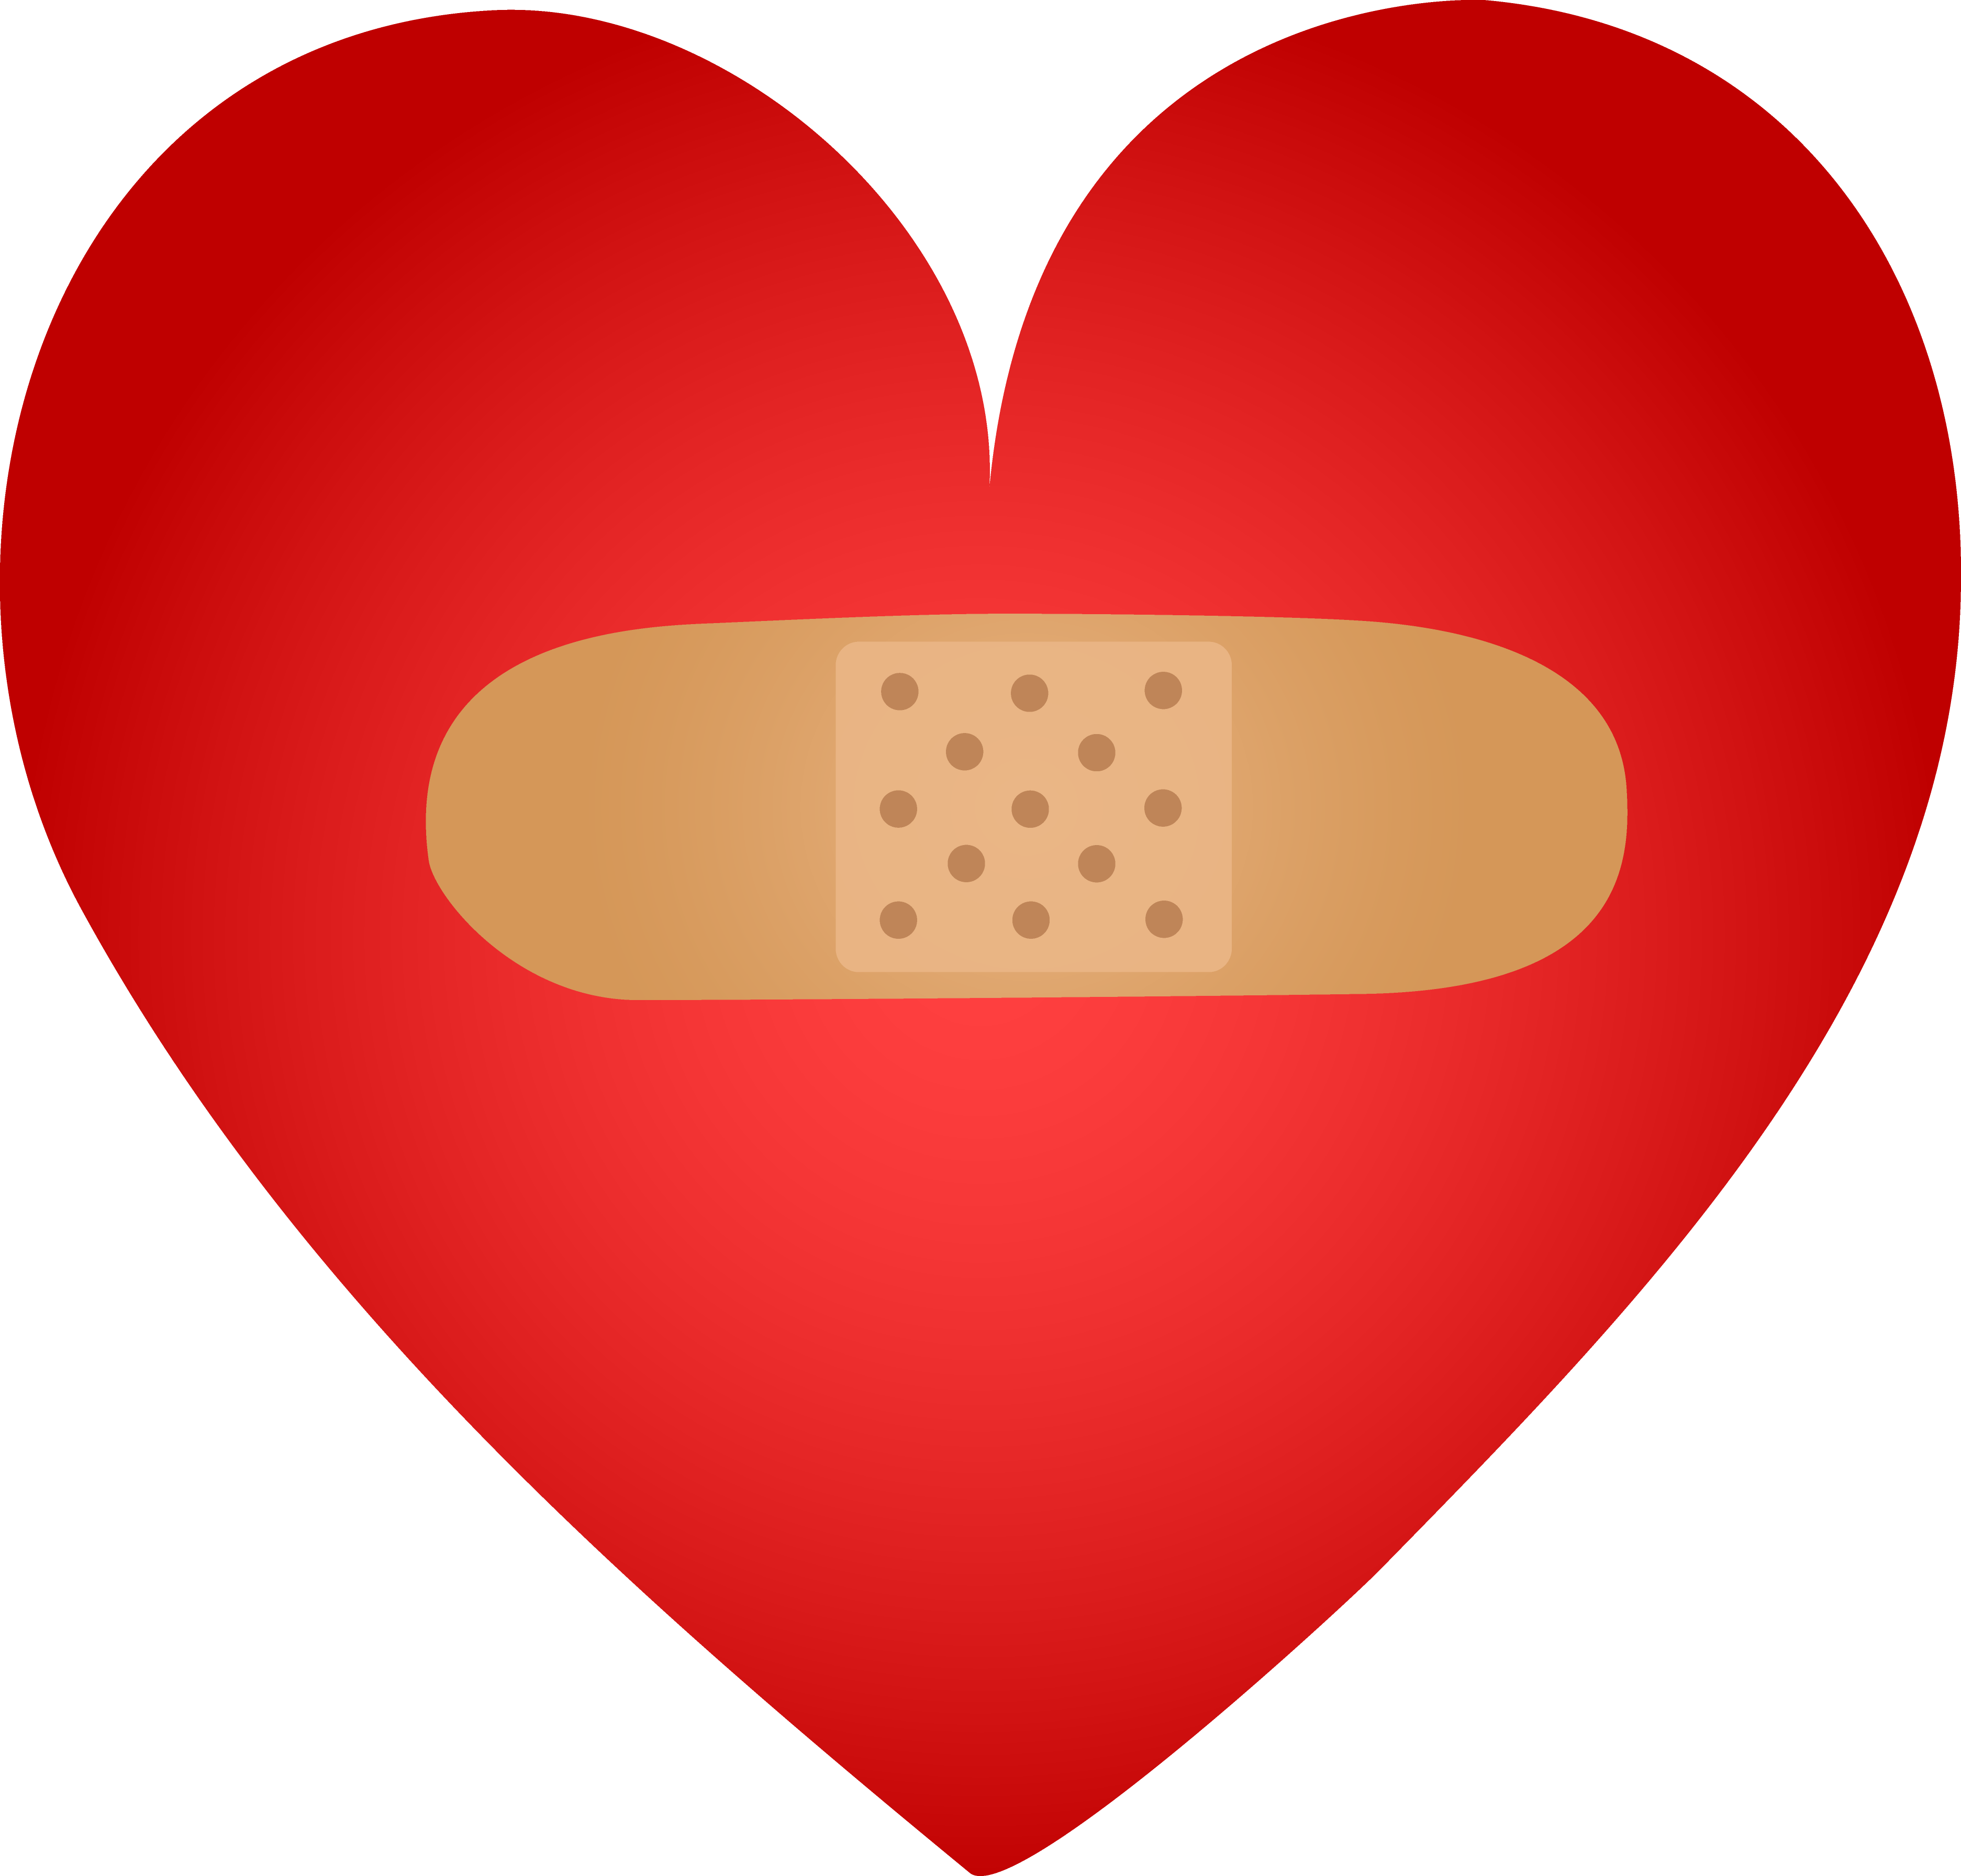 Put On Band Aid Clipart - ClipArt Best